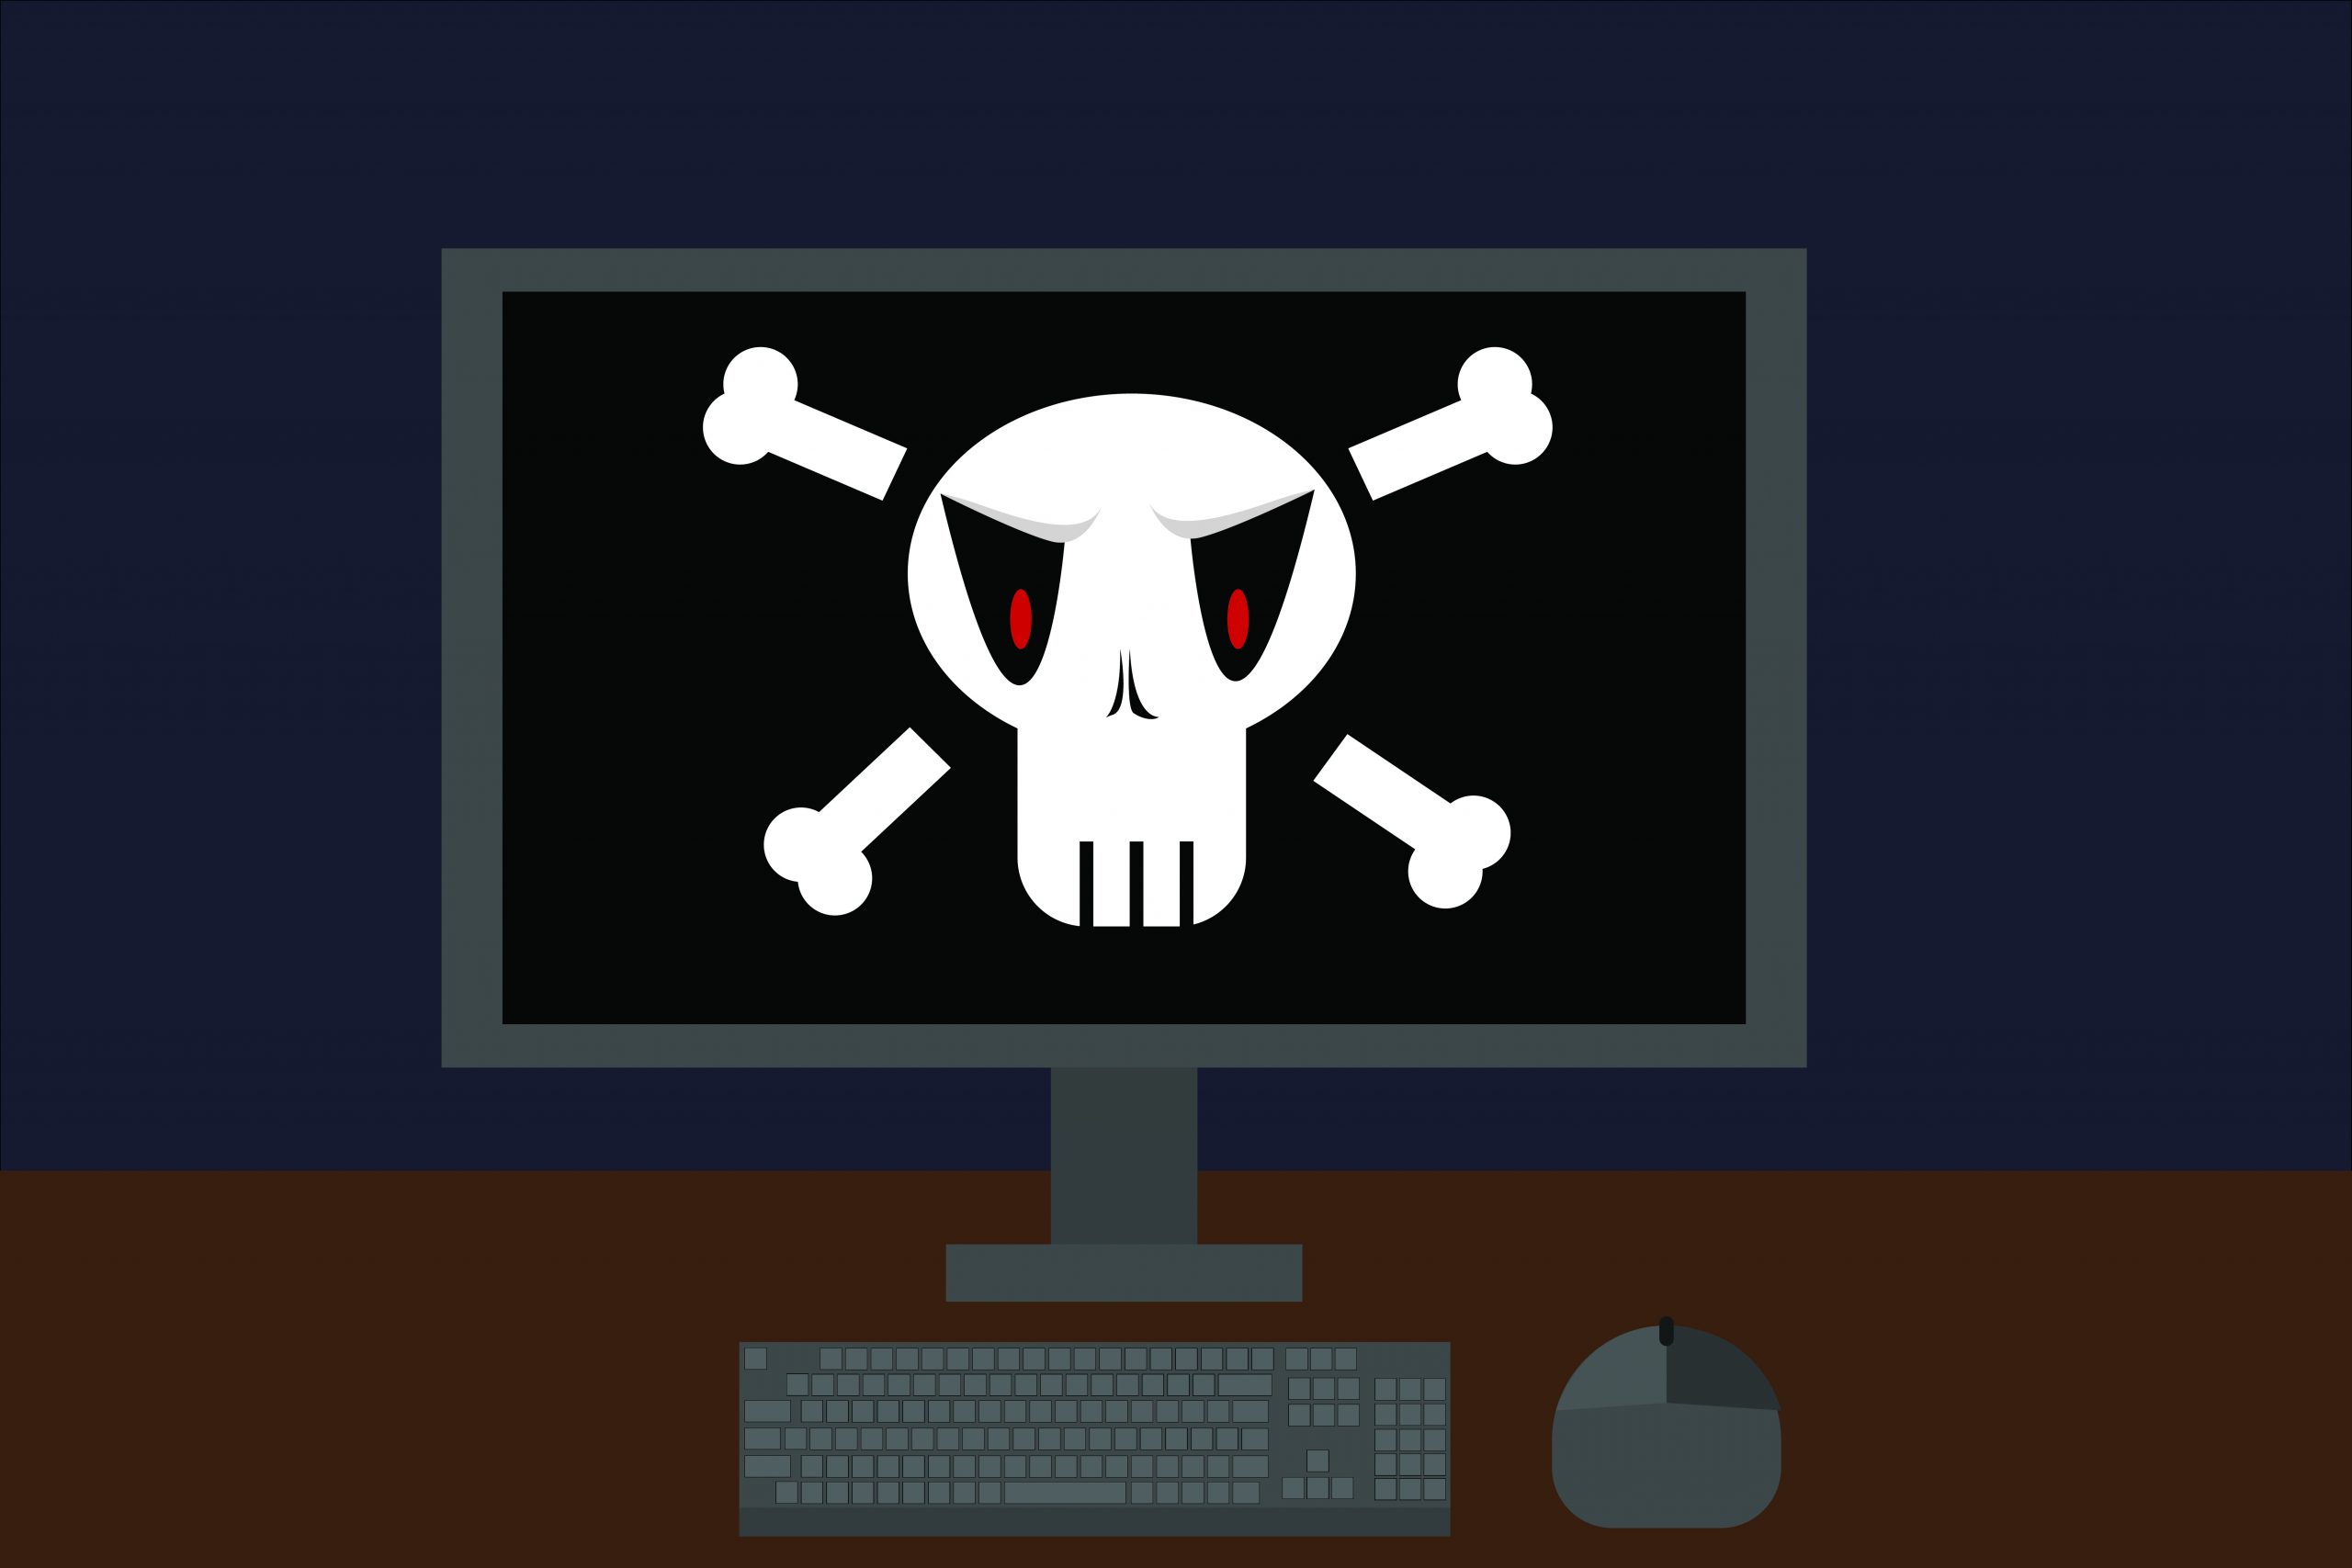 An illustration of a computer with a skull and crossbones on the screen in an article about hackers